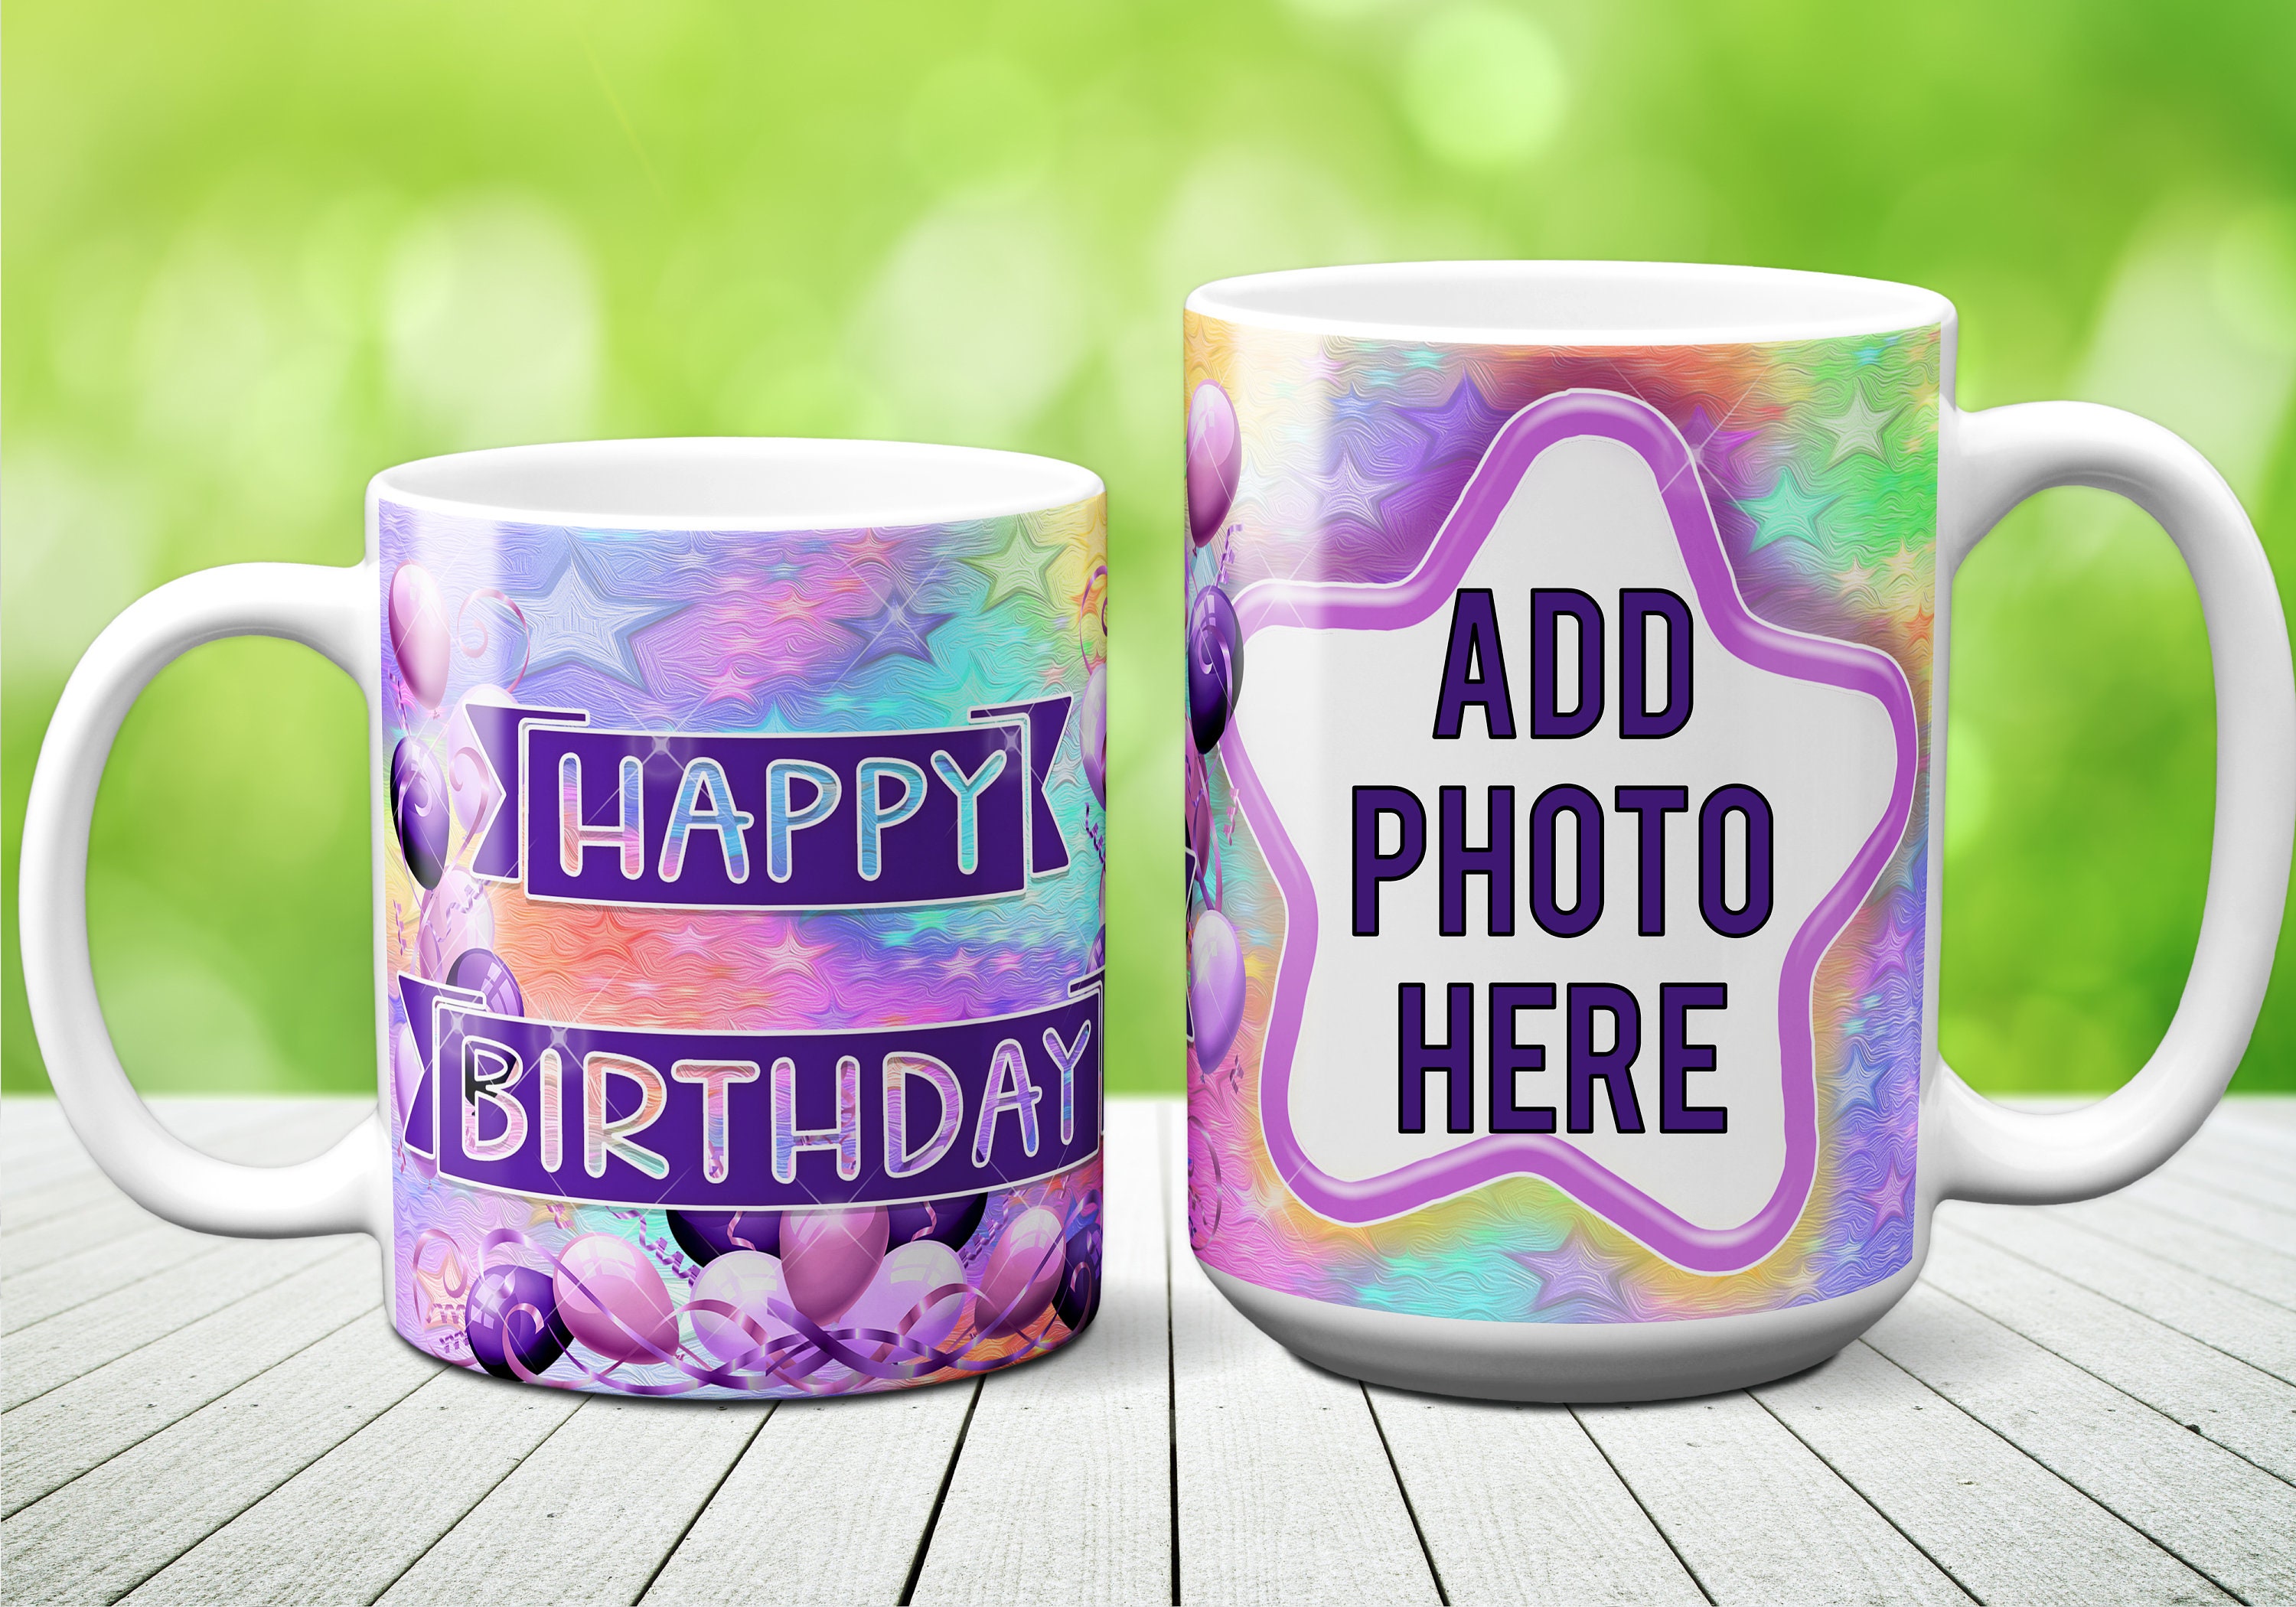 Happy Birthday Photo/memory Mug Sublimation Design for 11oz-15oz Mugs.  Presized for Your Convinience. Just Add Photo and Print -  Finland